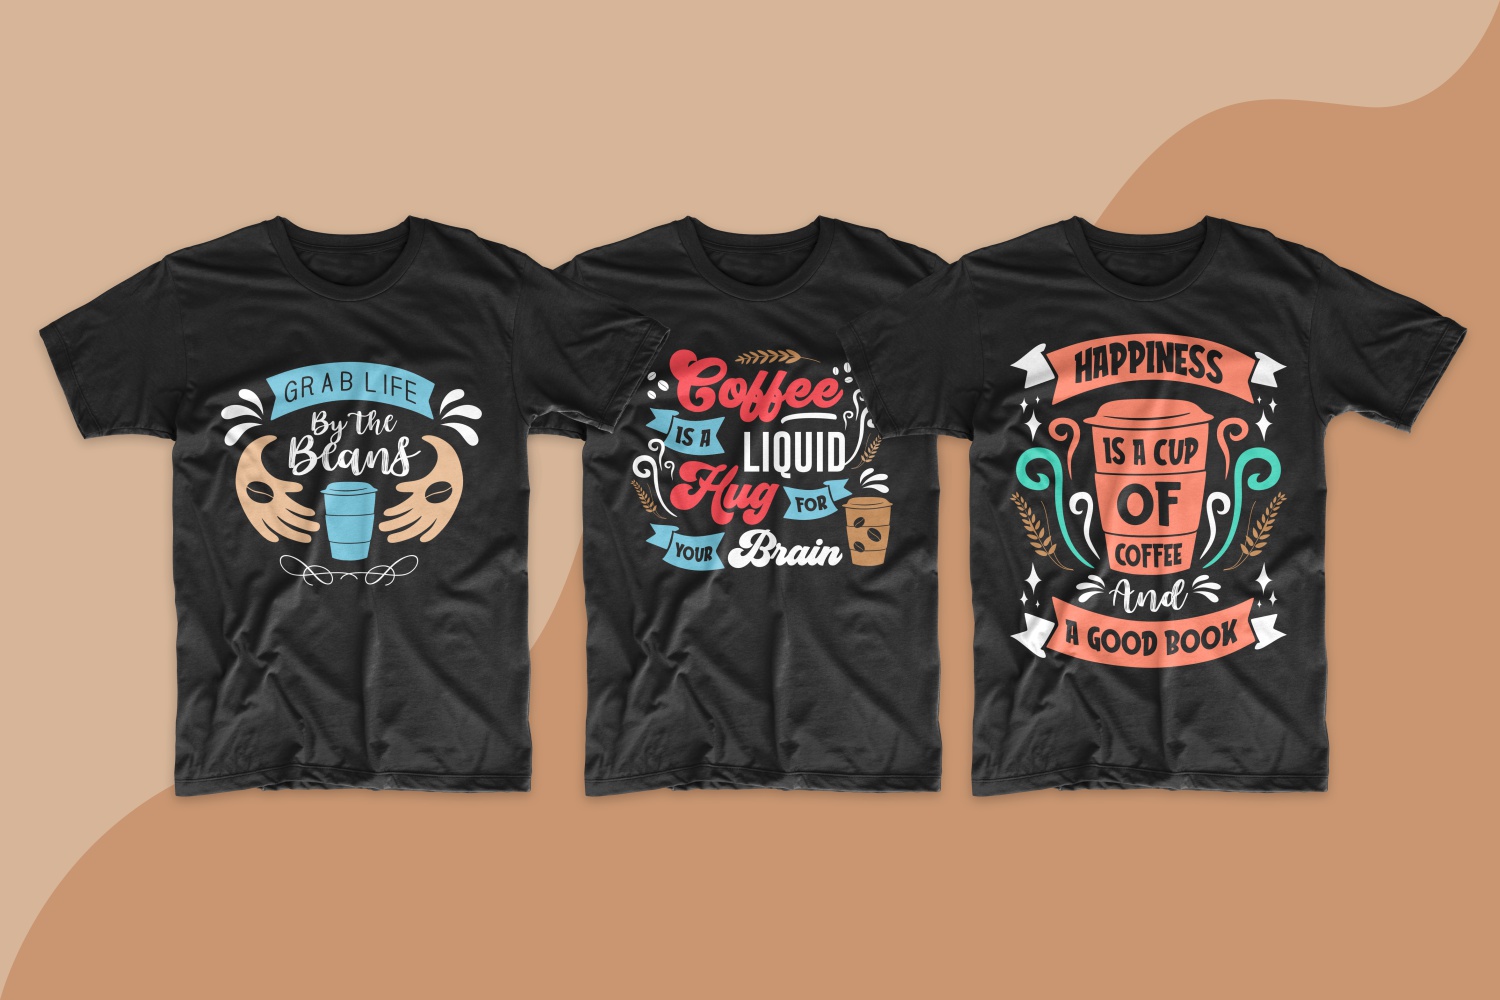 Dark T-shirts with a classic cut with an interesting coffee addiction lettering.